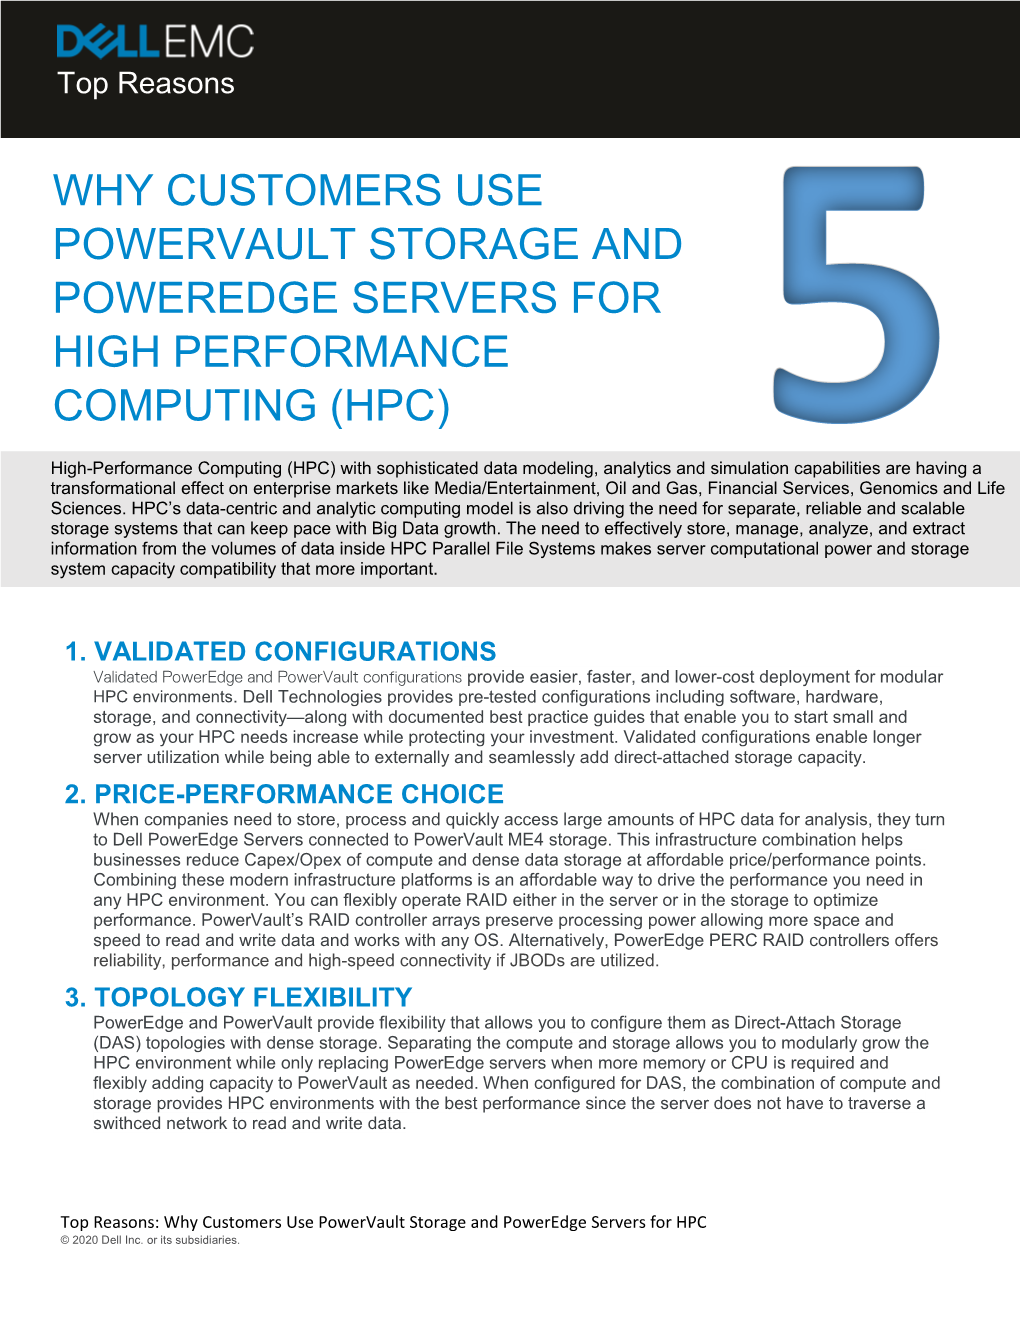 Why Customers Use Powervault Storage and Poweredge Servers for High Performance Computing (Hpc)